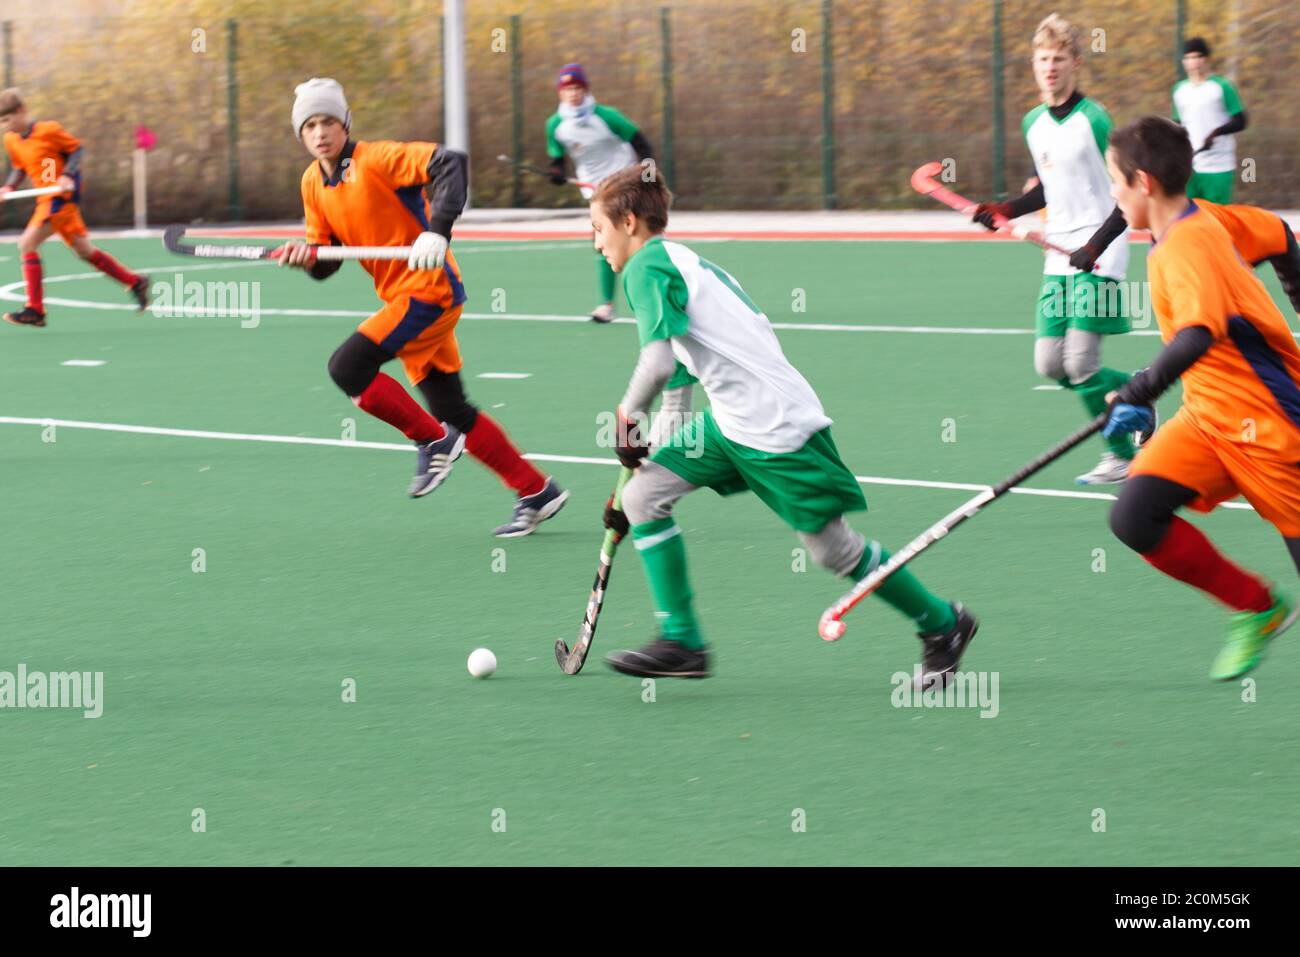 Youth field hockey competition Stock Photo